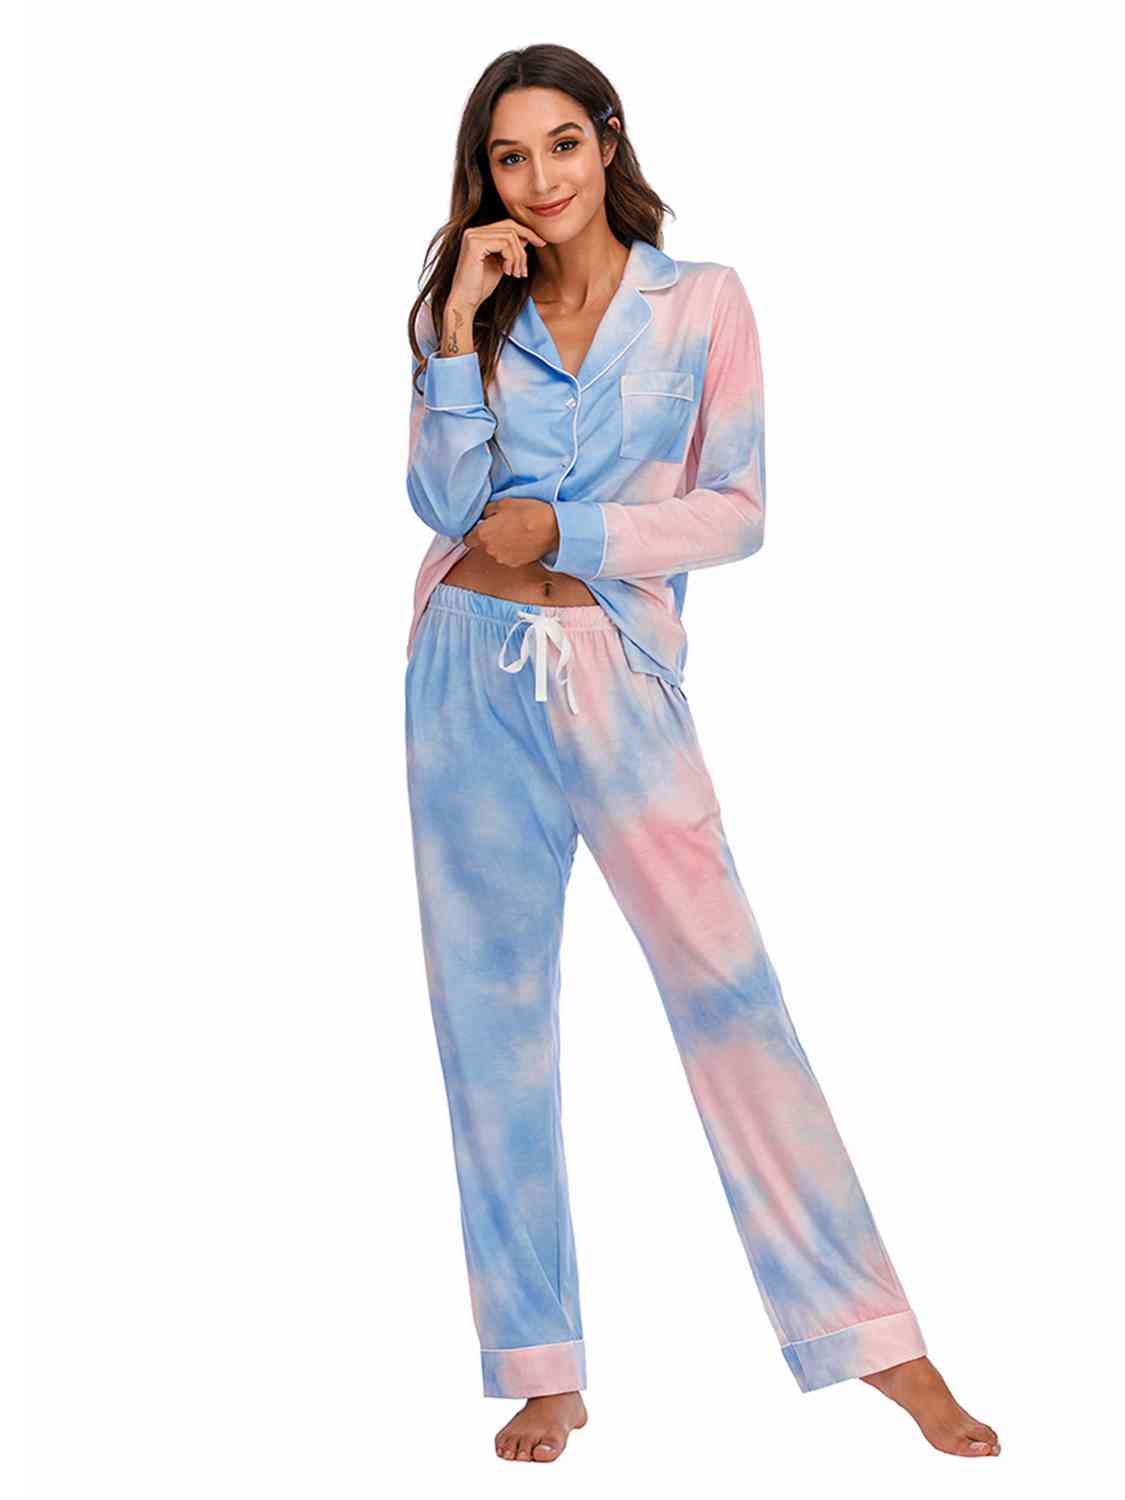 Collared Neck Long Sleeve Loungewear Set with Pockets (9 Colors) Loungewear Krazy Heart Designs Boutique   